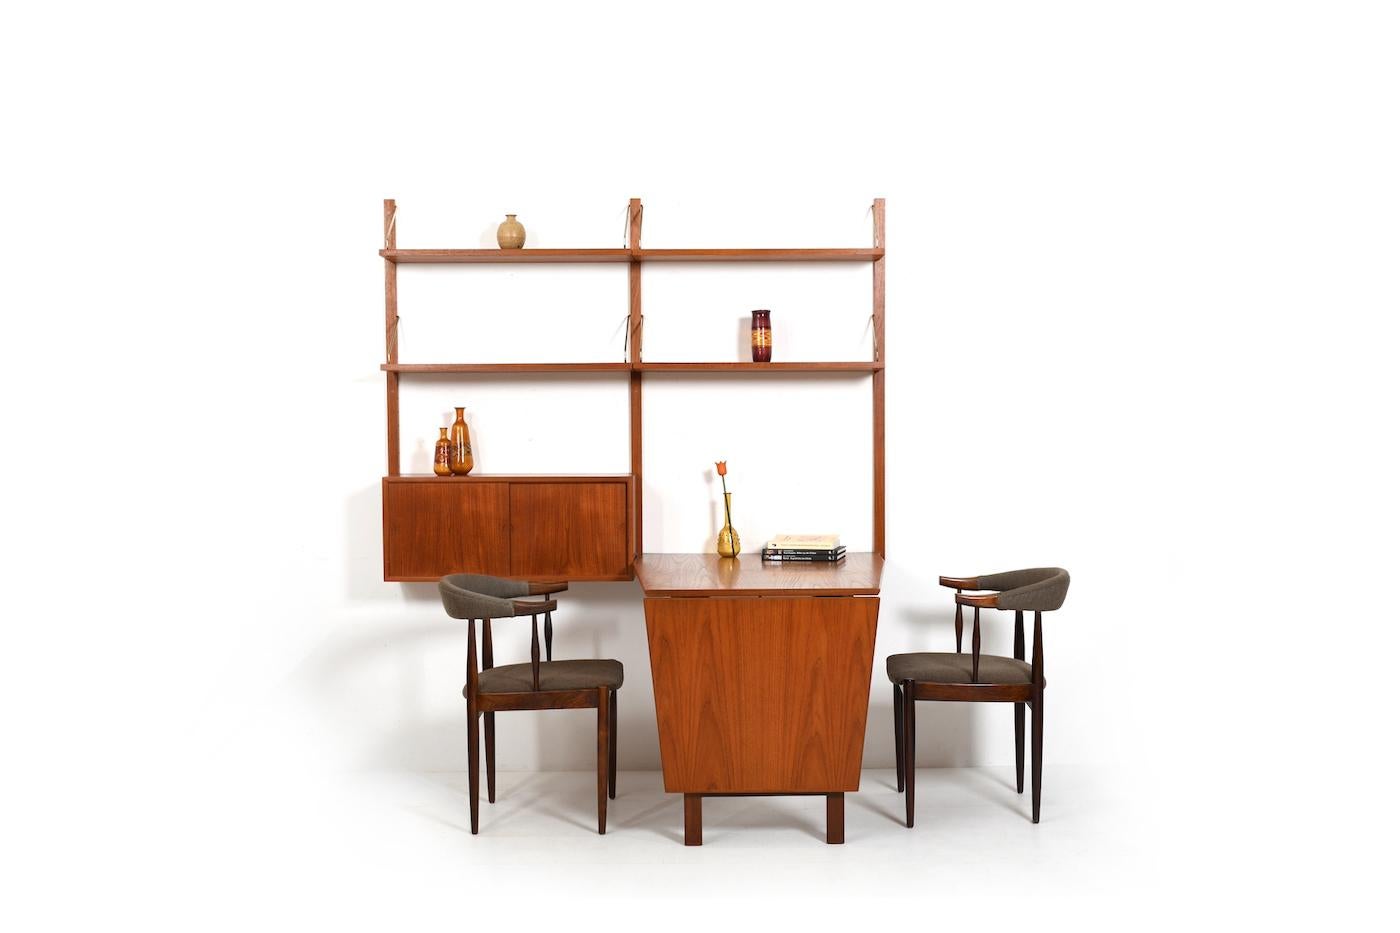 Royal system by Poul Cadovius for Cado Denmark. With 1 small cabinet, shelfes and conical shaped desk. brass holders. Part of the table top can be folded up. 1960s production.